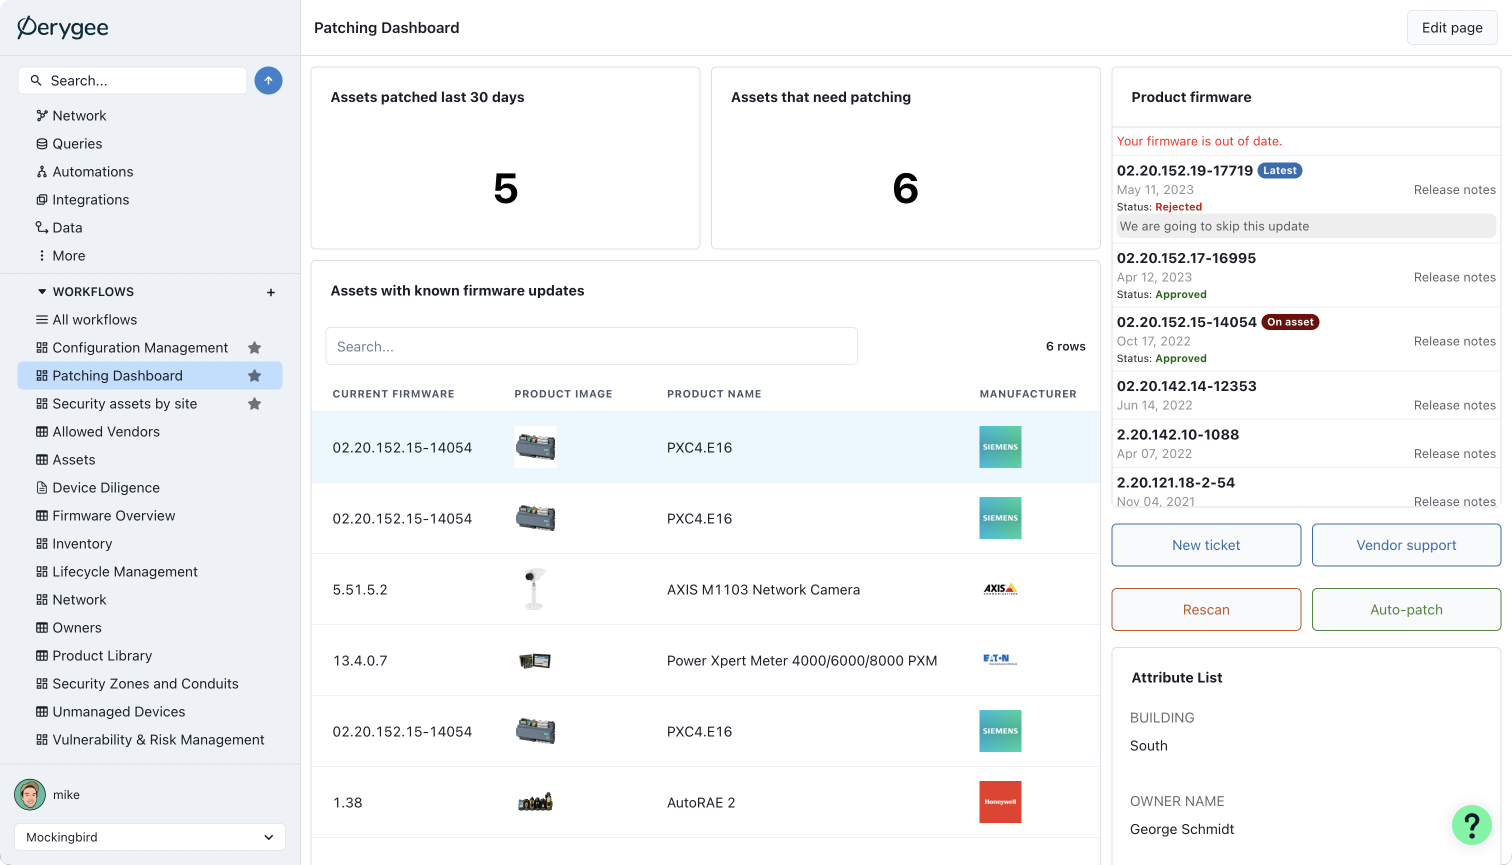 A 'Patching Dashboard' in Perygee's platform showing asset-specific firmware update and patching information